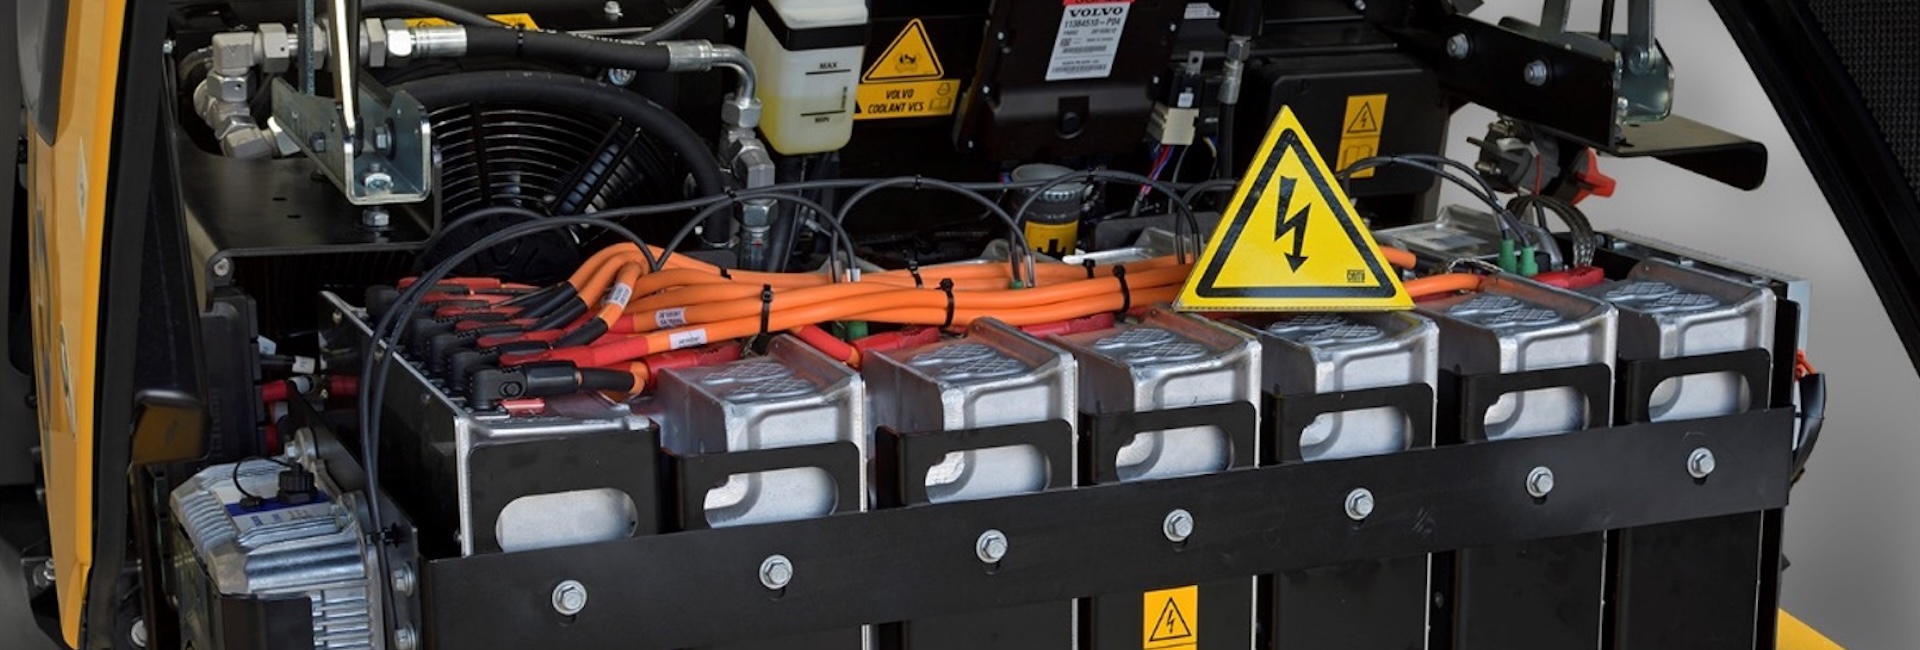 A view of the battery compartment on a Volvo compact electric machine.